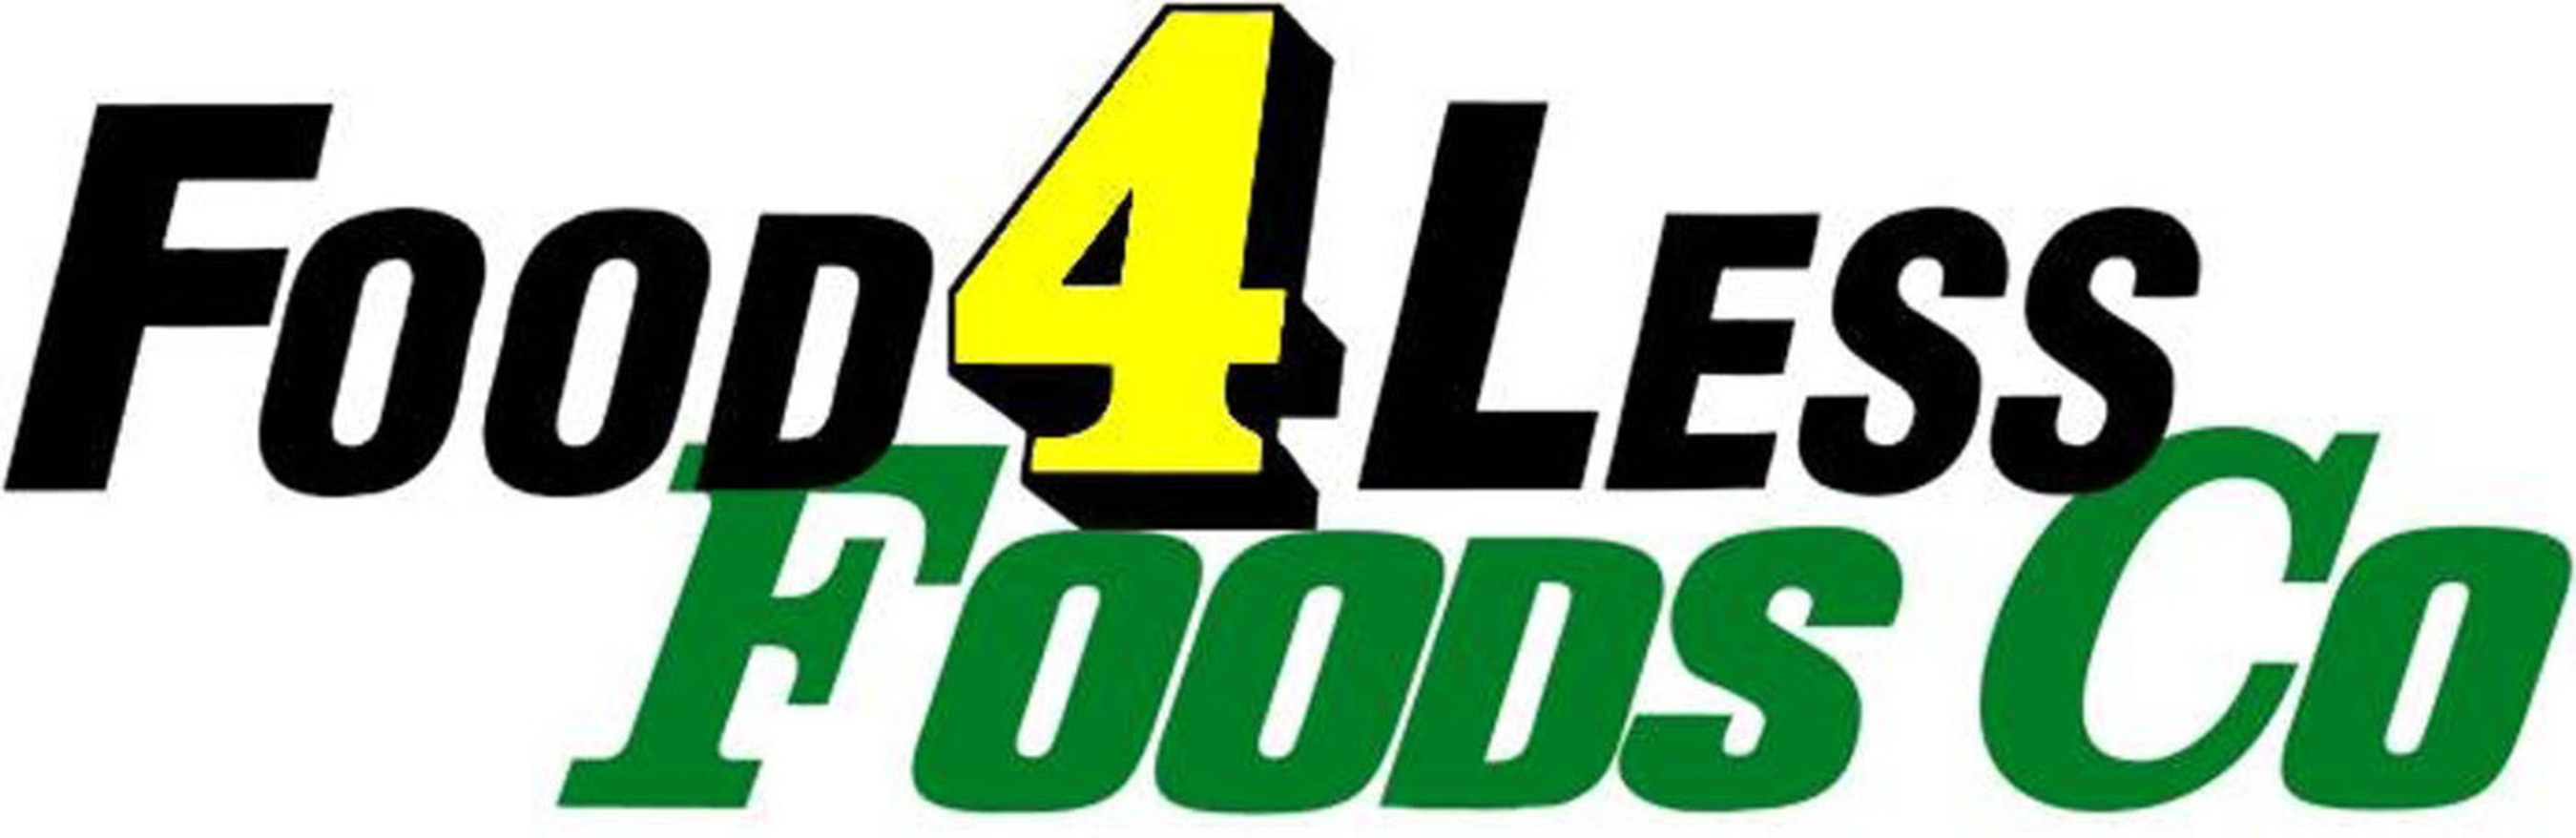 Food 4 Less/Foods Co - The Prices Bring You In, the Quality Brings You Back. (PRNewsFoto/Food 4 Less/Foods Co) (PRNewsFoto/)